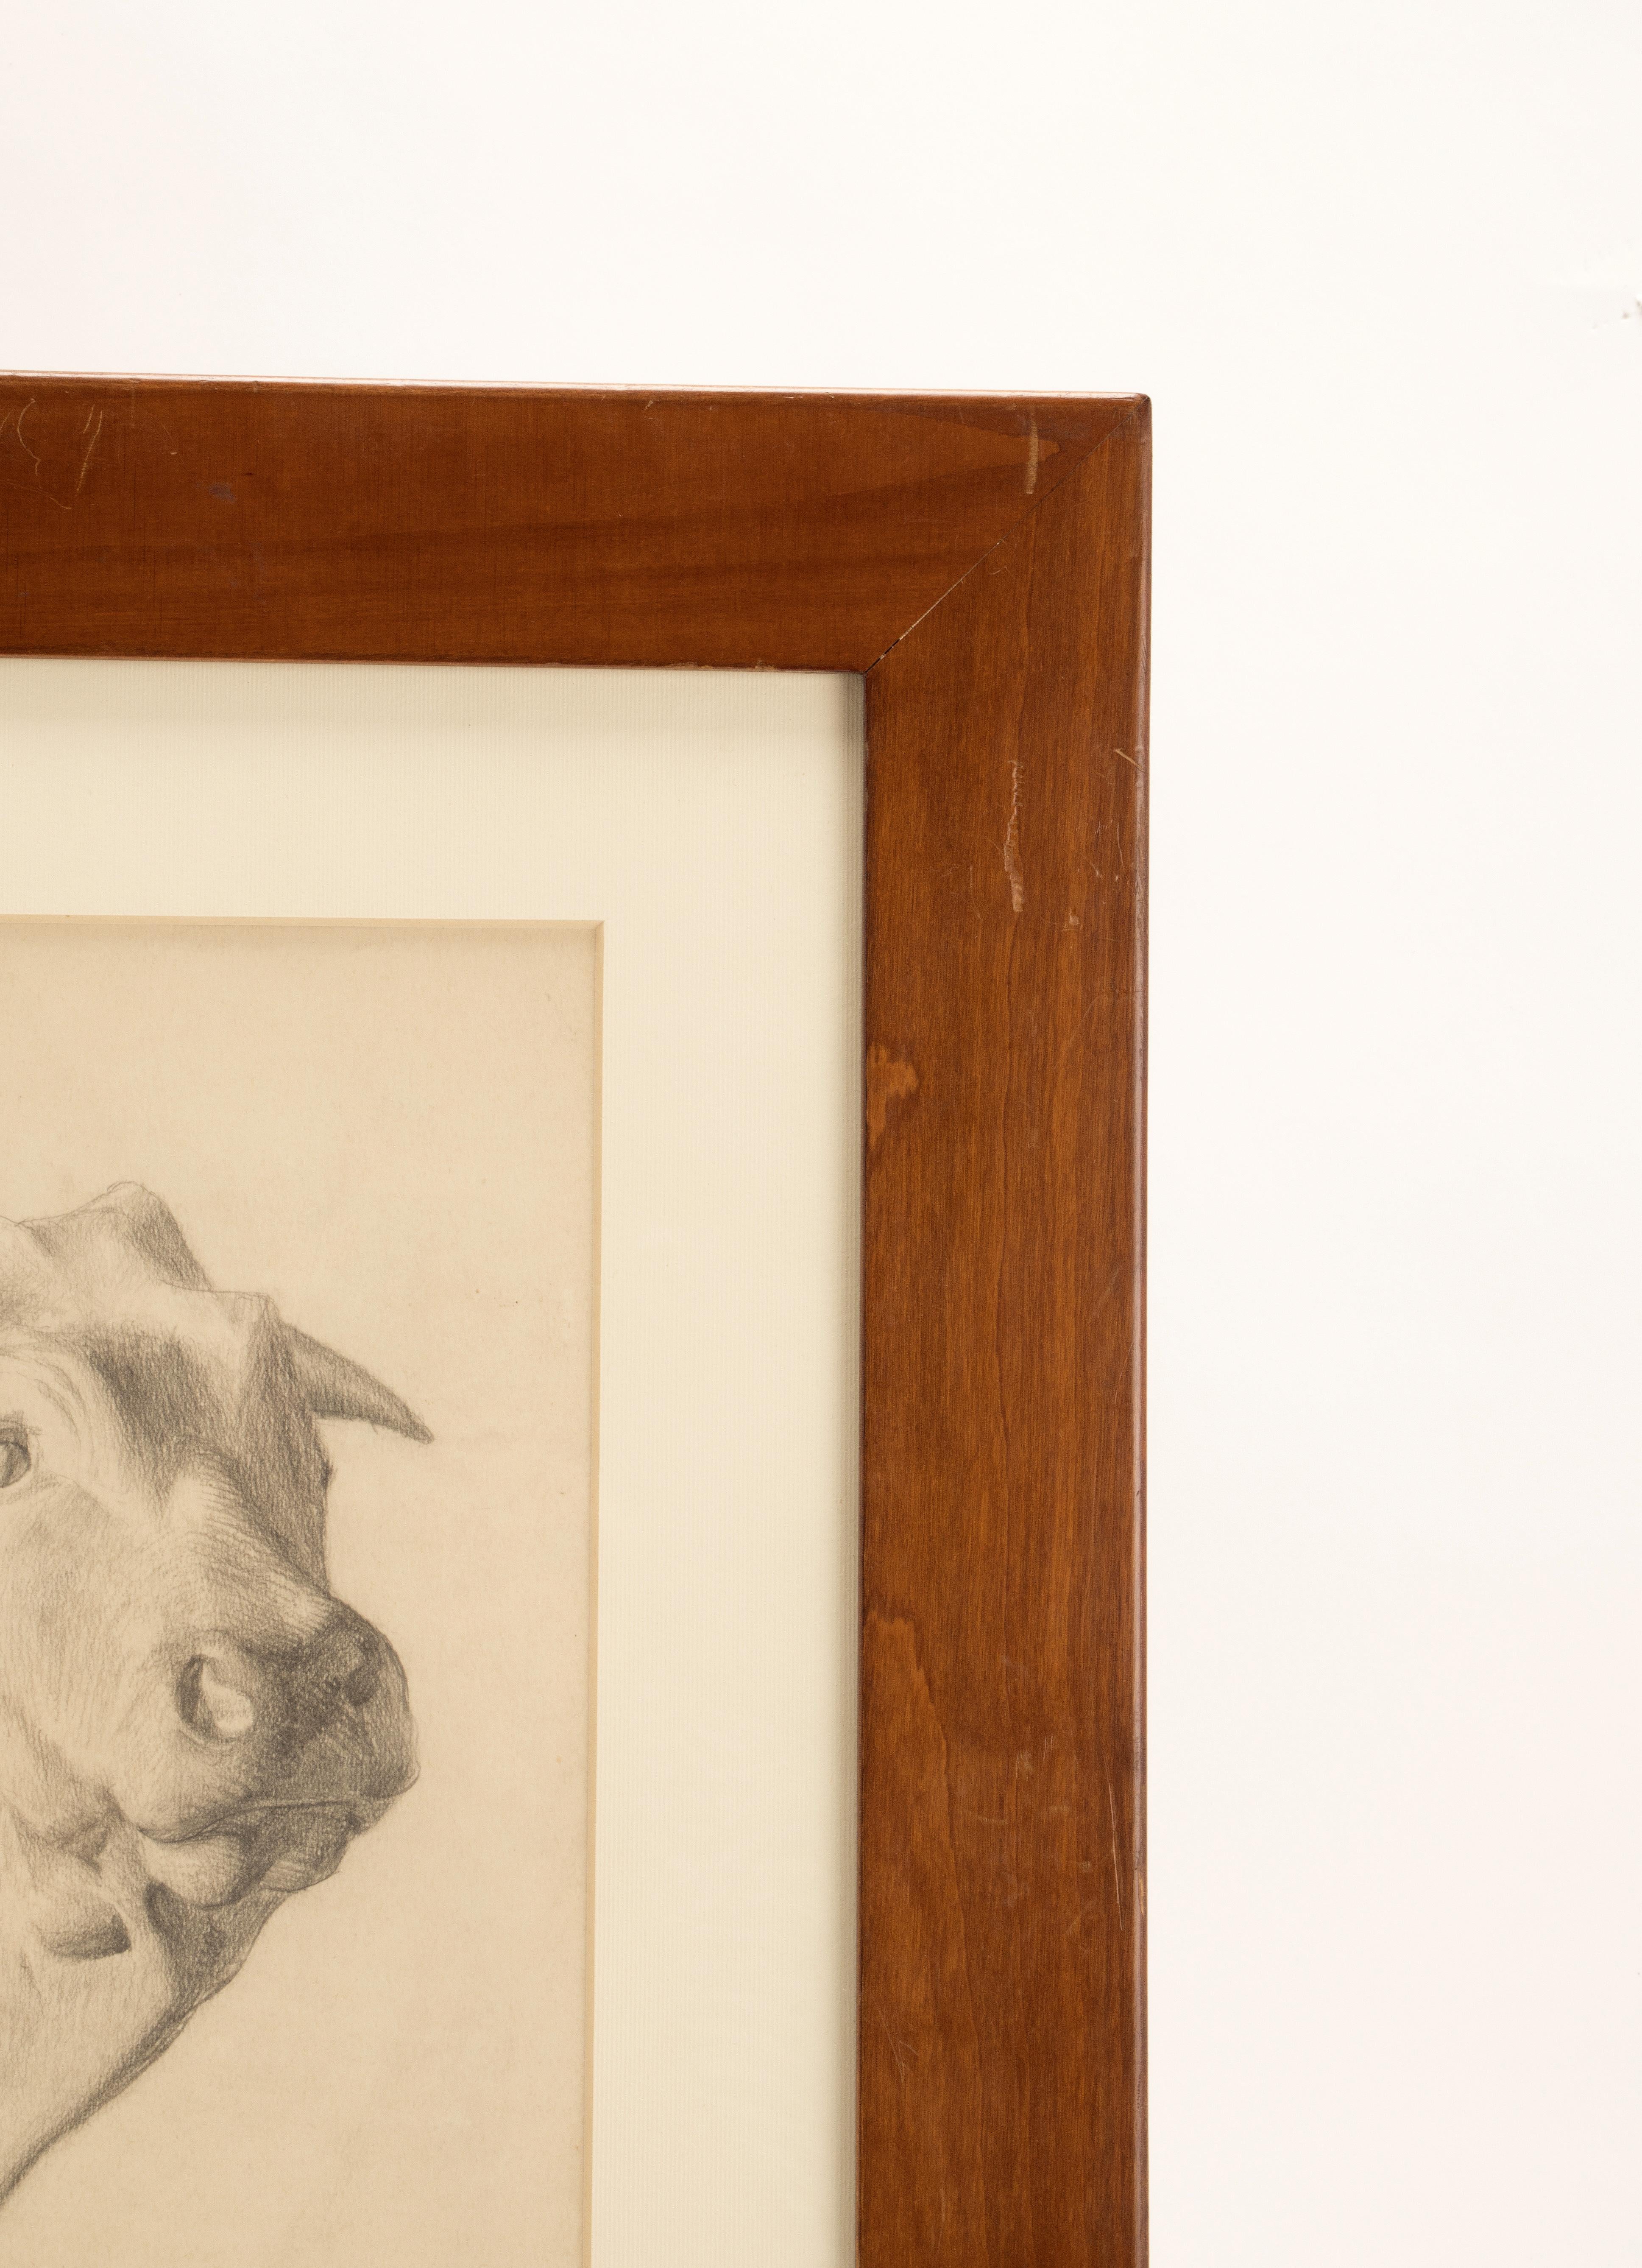 Austrian Pencil Drawing Depicting the Head of an Ox, Austria 1920 For Sale